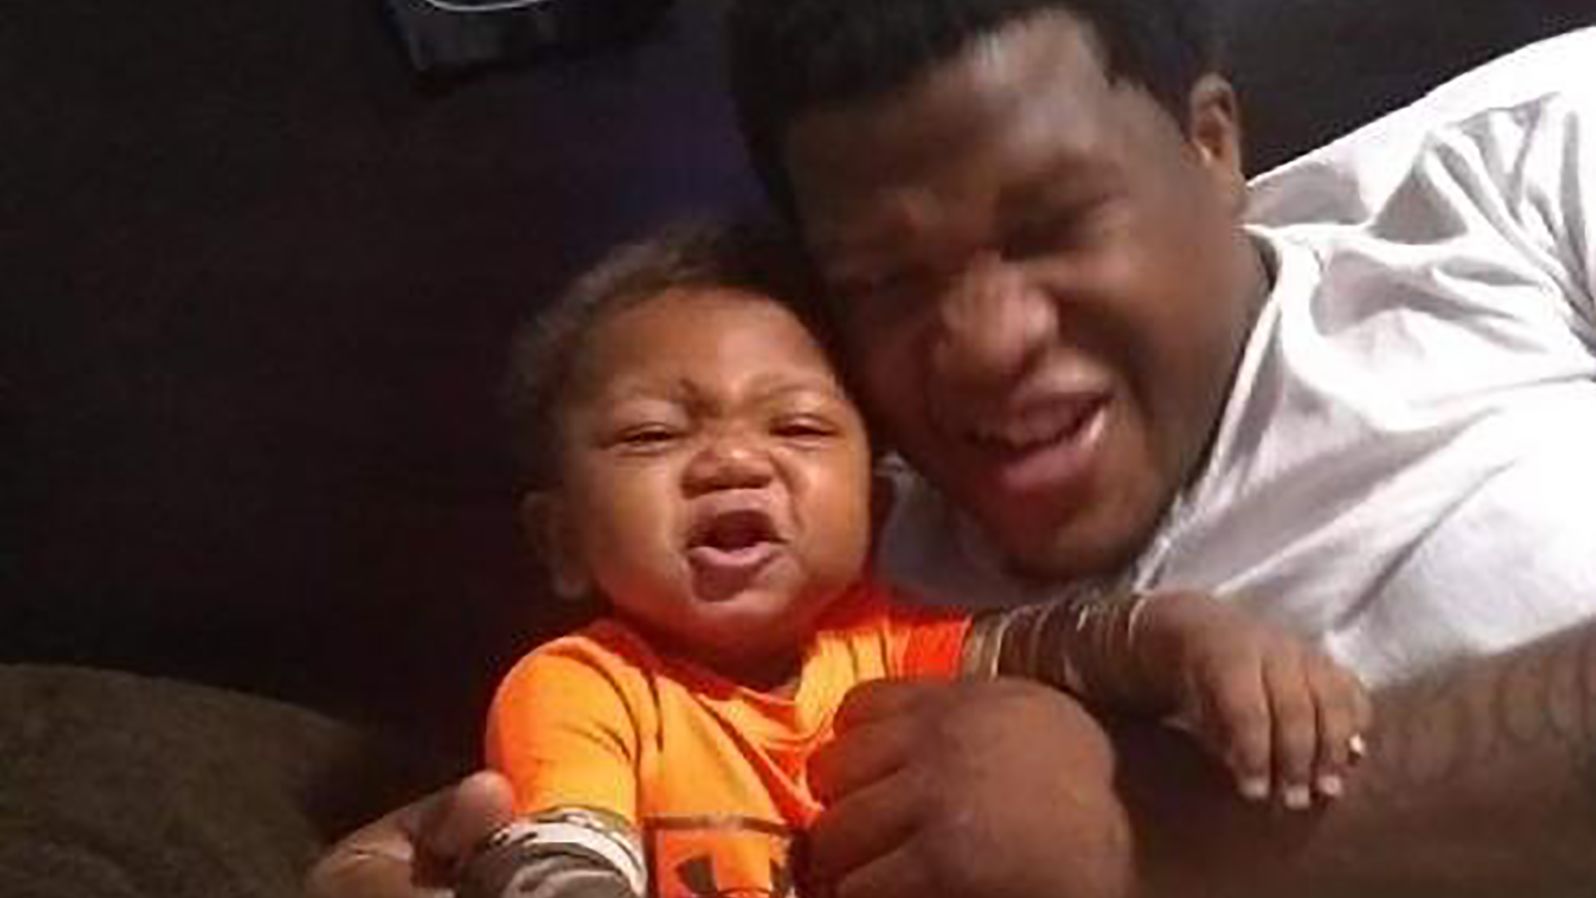 Jemel Roberson's son Tristan is now 9 months old. 